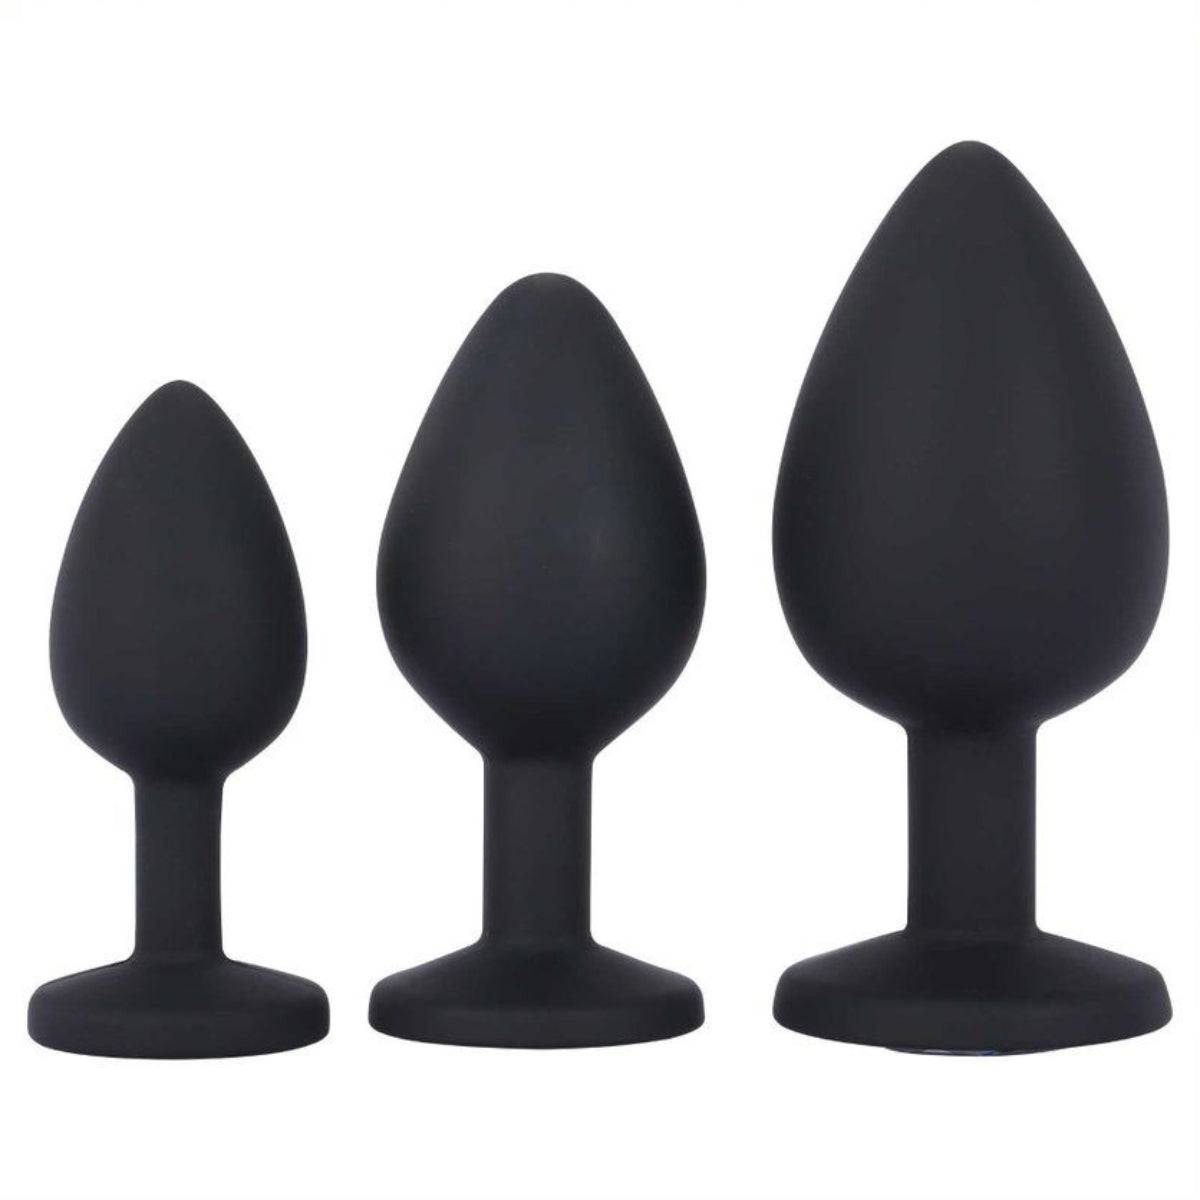 Front View Product - Me You Us Trio Of Jewels Jewelled Butt Plug Set Black - Simply Pleasure